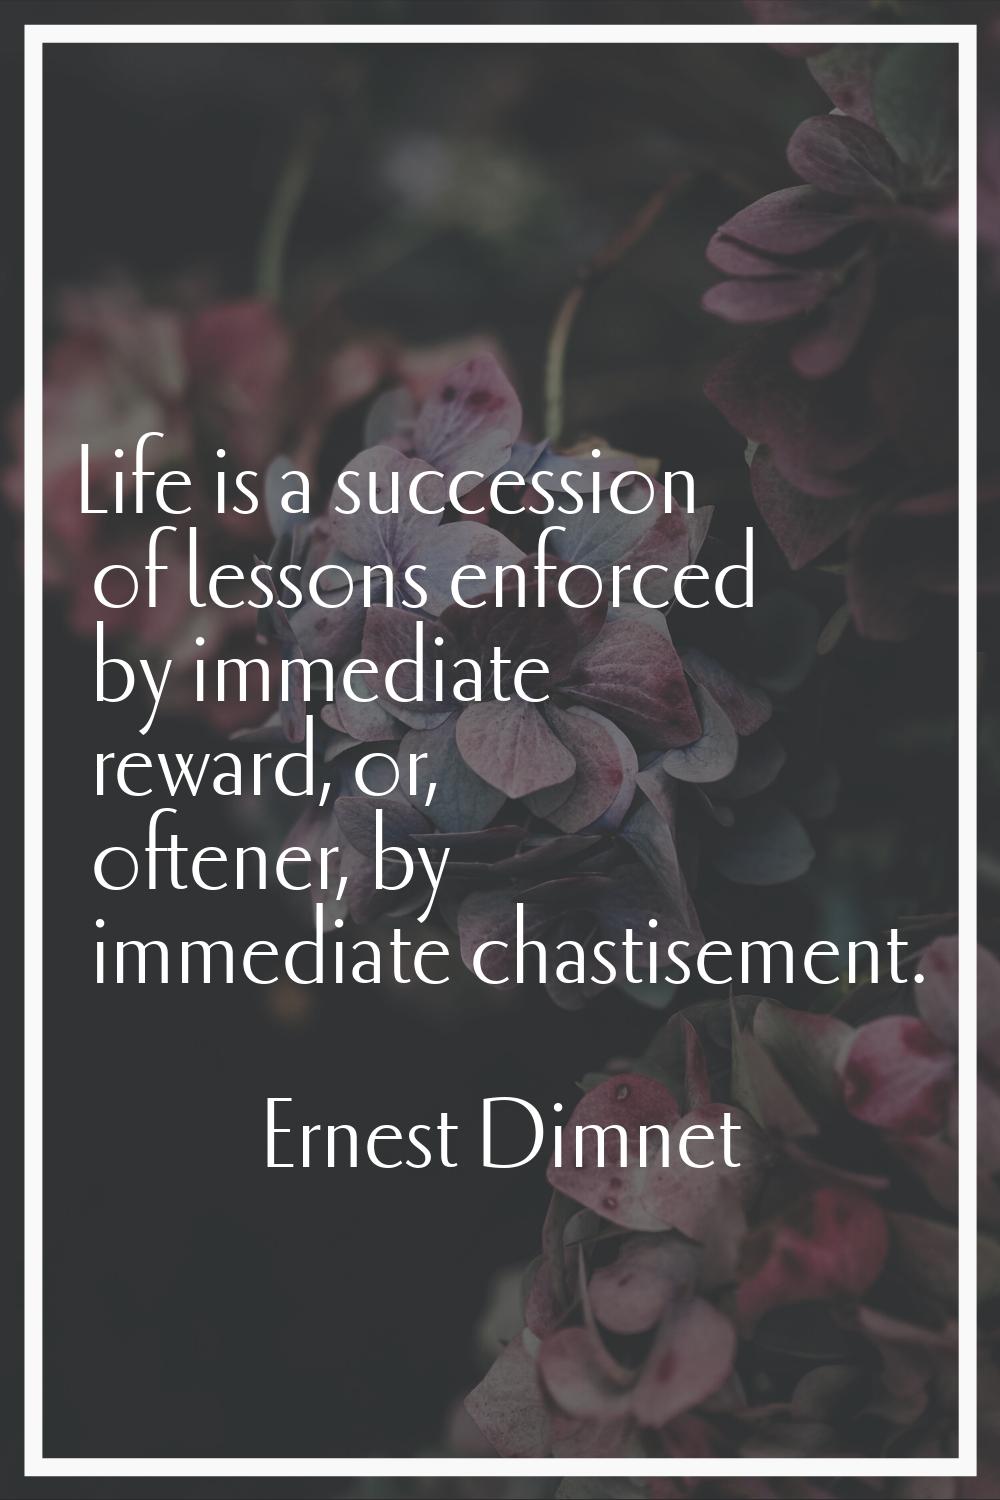 Life is a succession of lessons enforced by immediate reward, or, oftener, by immediate chastisemen